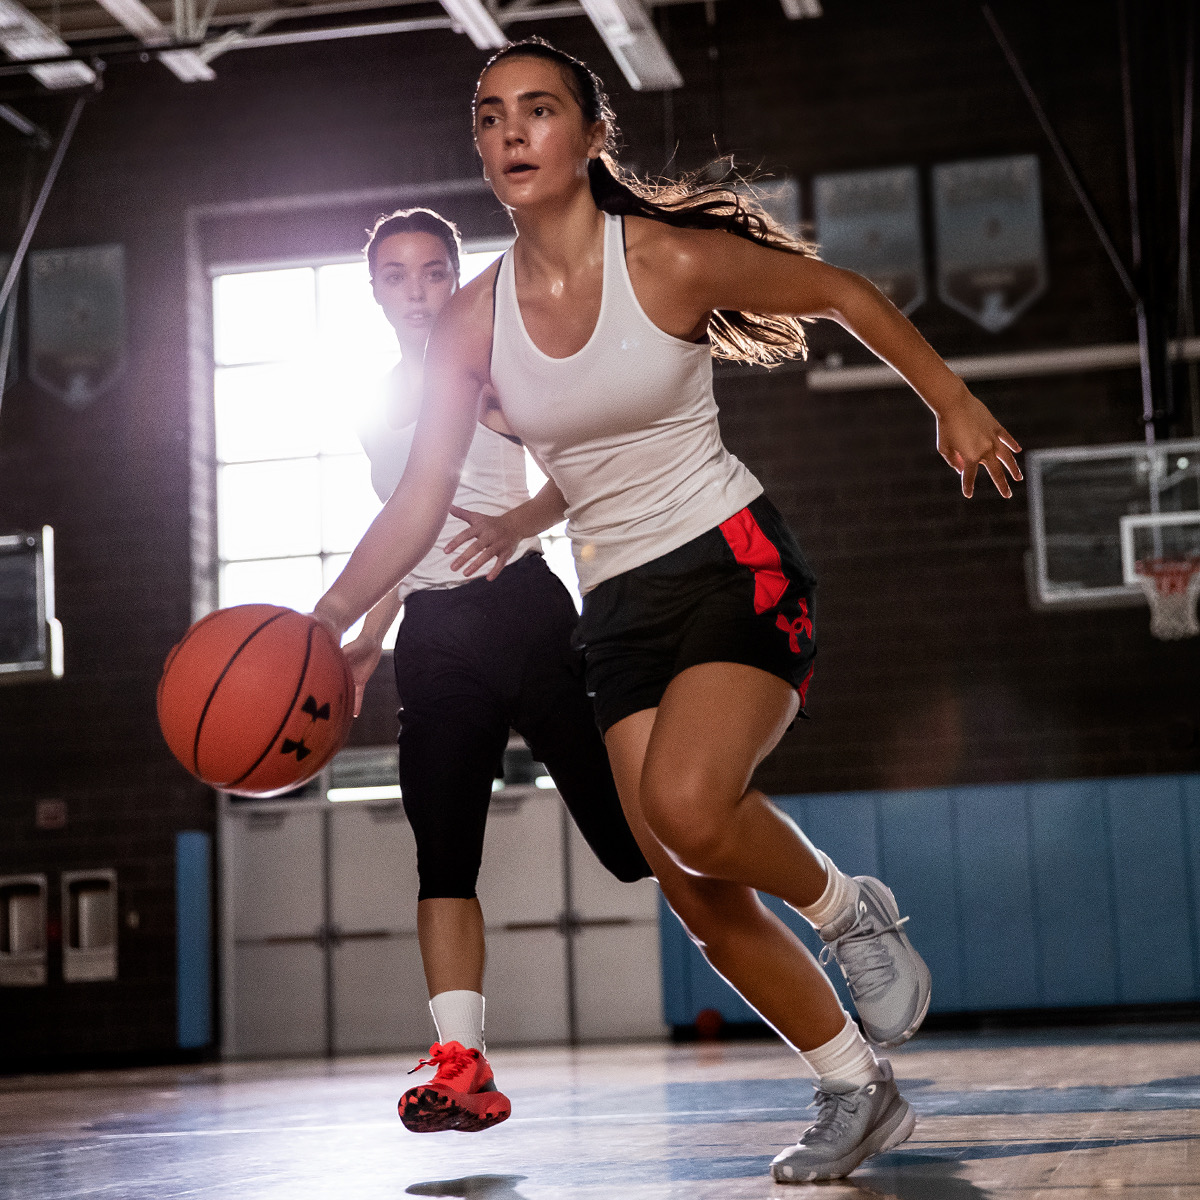 Dick's Sporting Goods, Under Armour collaborate on women's